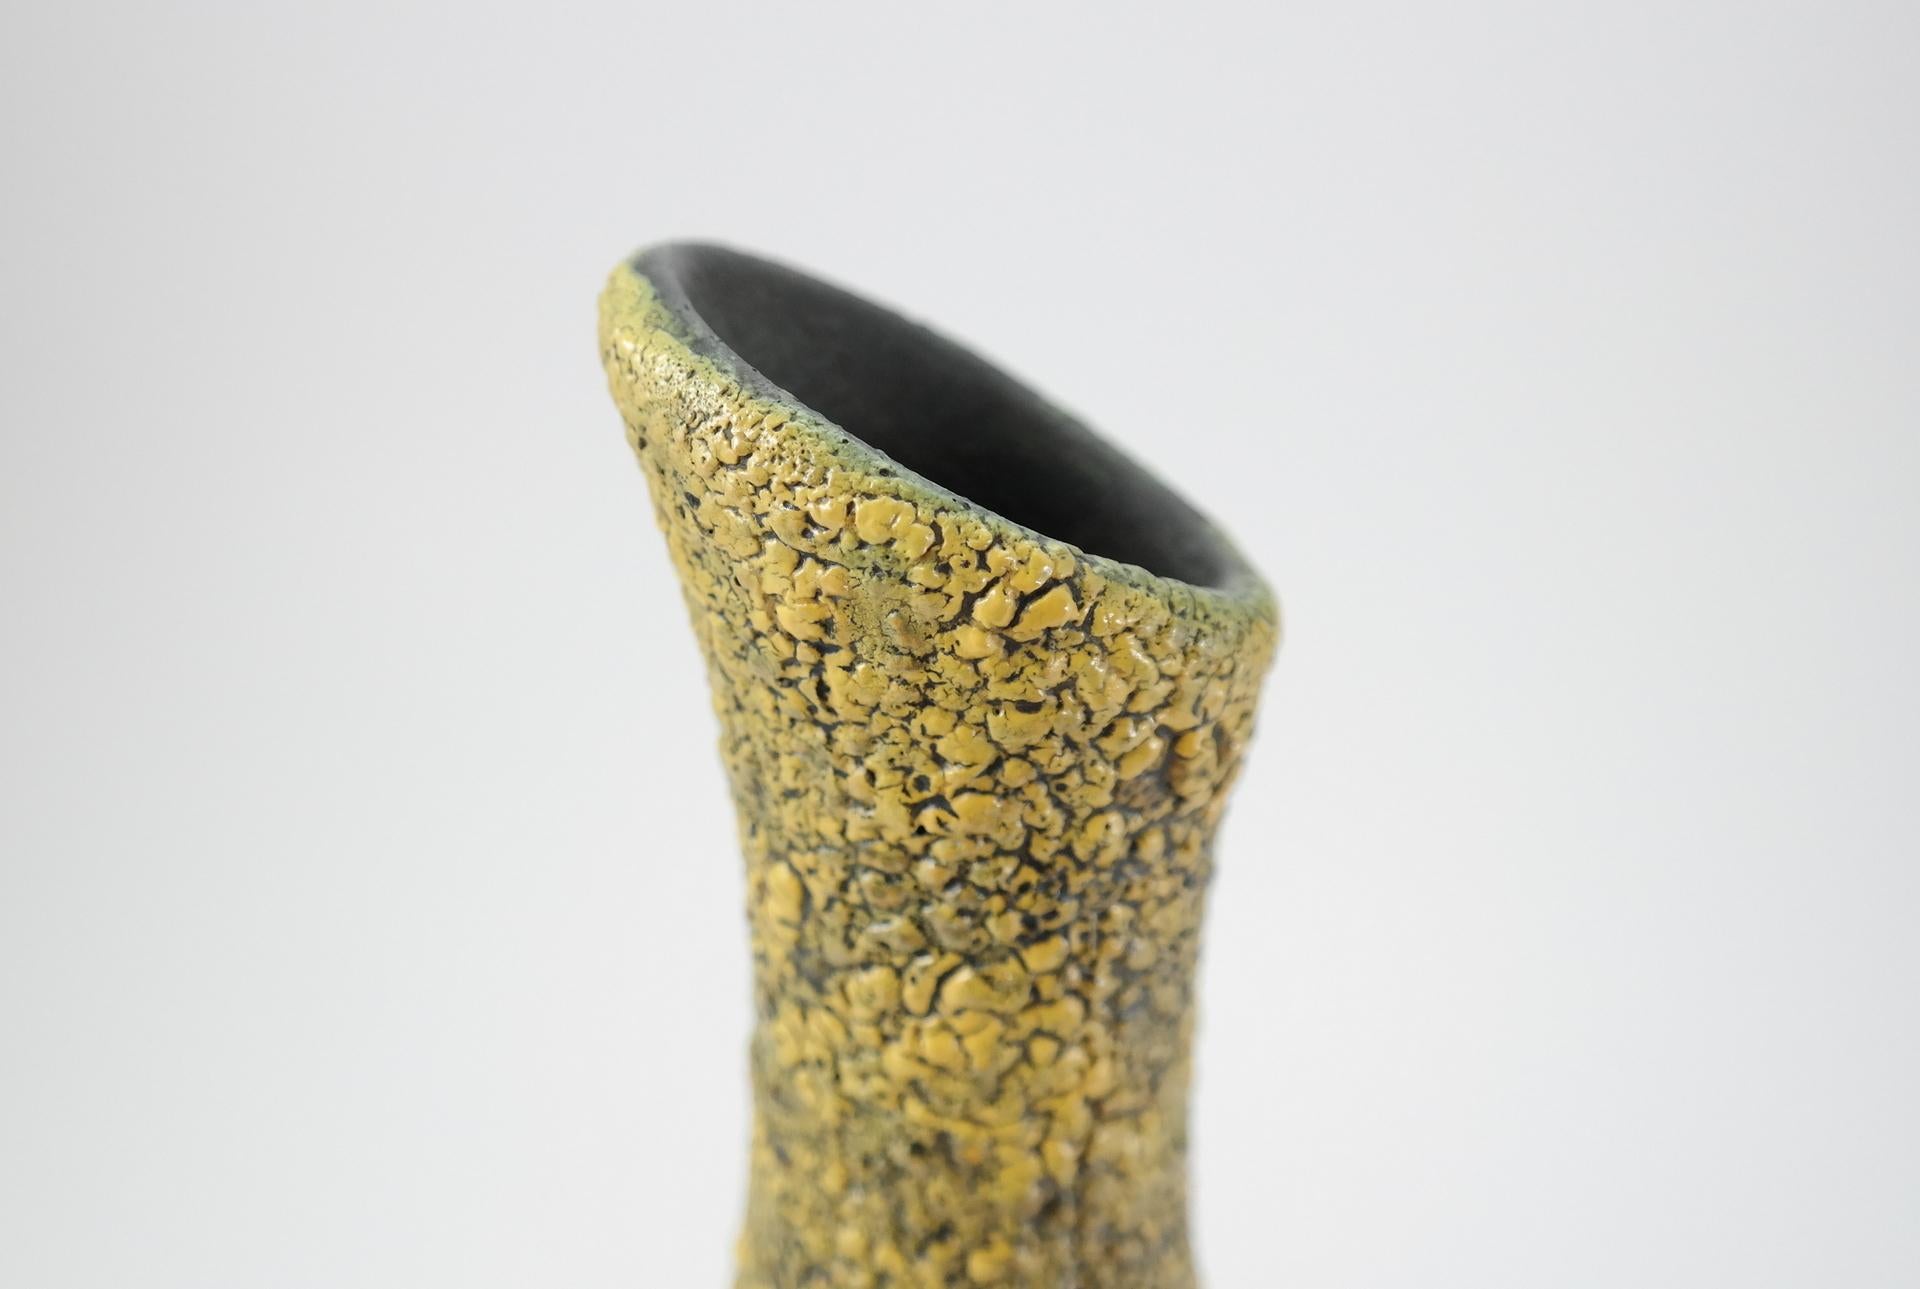 Midcentury Ceramic Table Vase with Cortina Cracked Glaze, 1960s For Sale 1